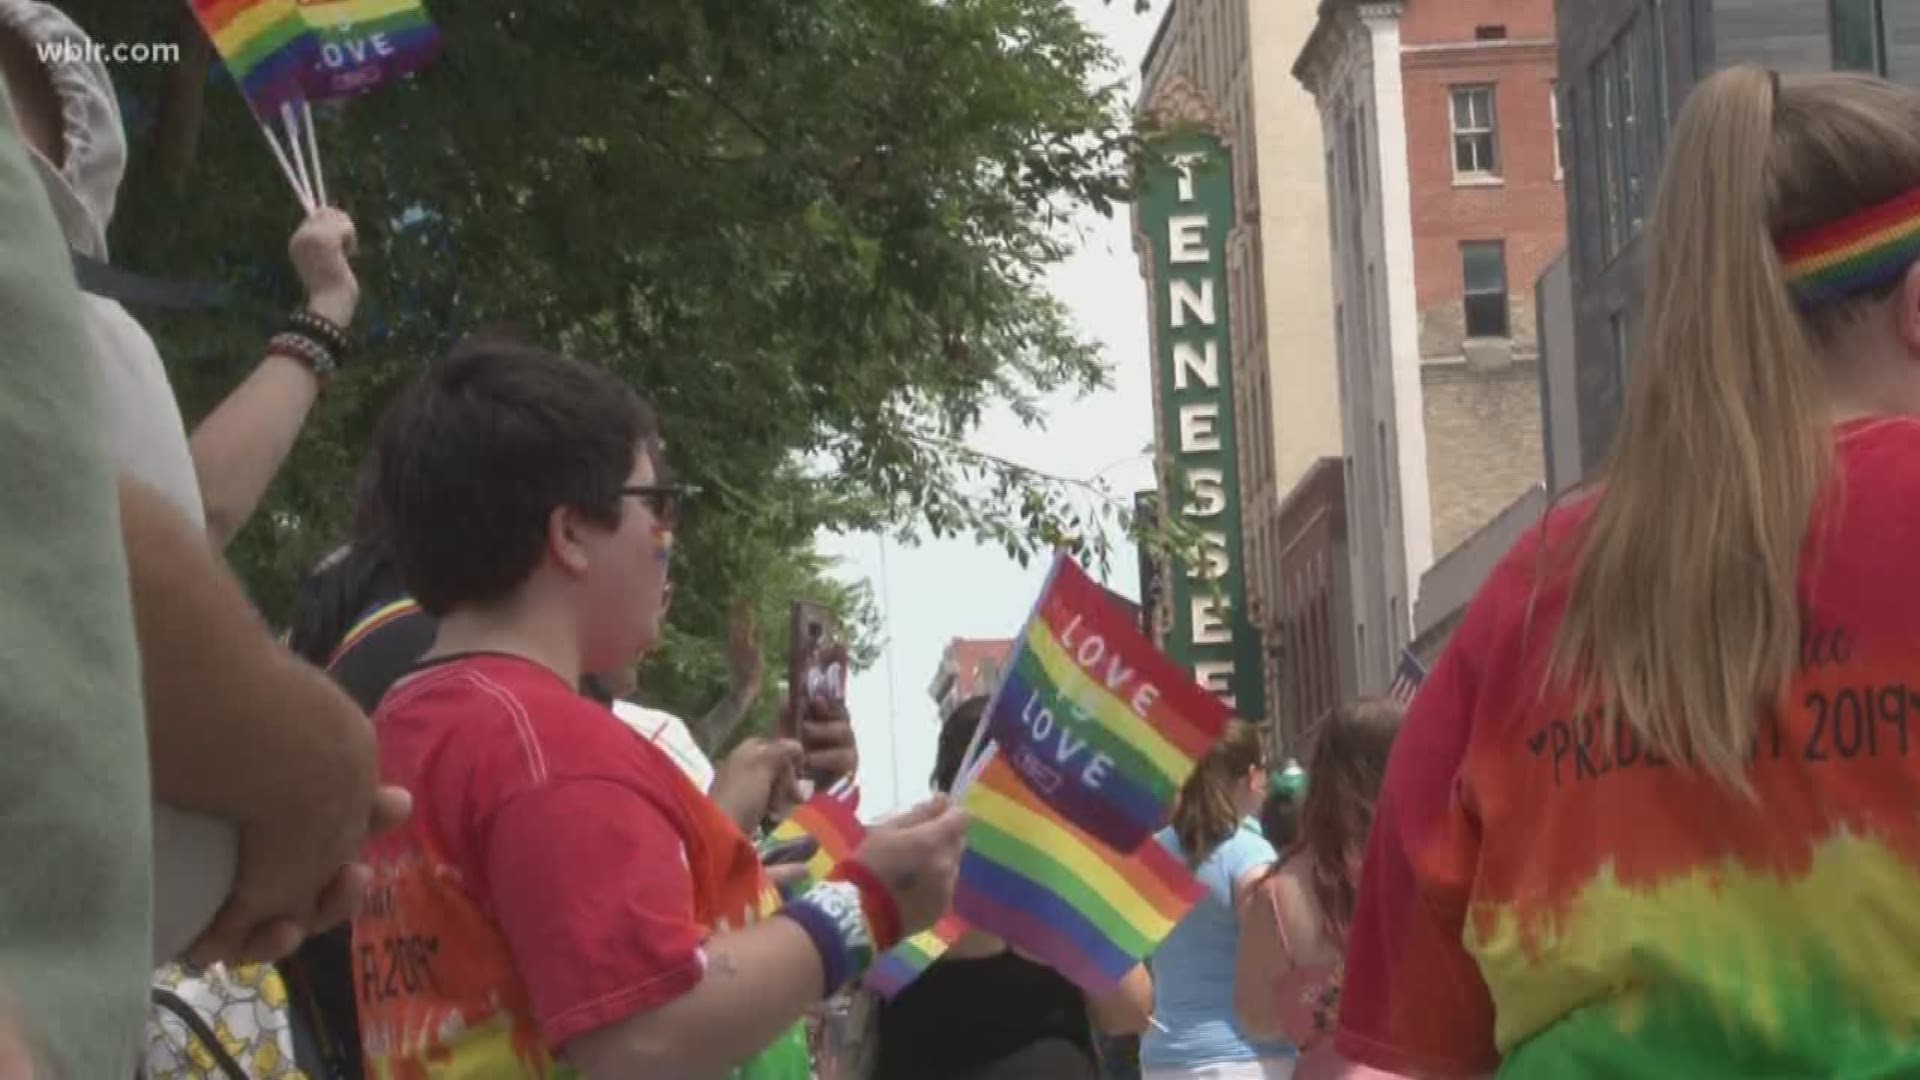 Thousands crowd Gay Street to support Knox PrideFest parade